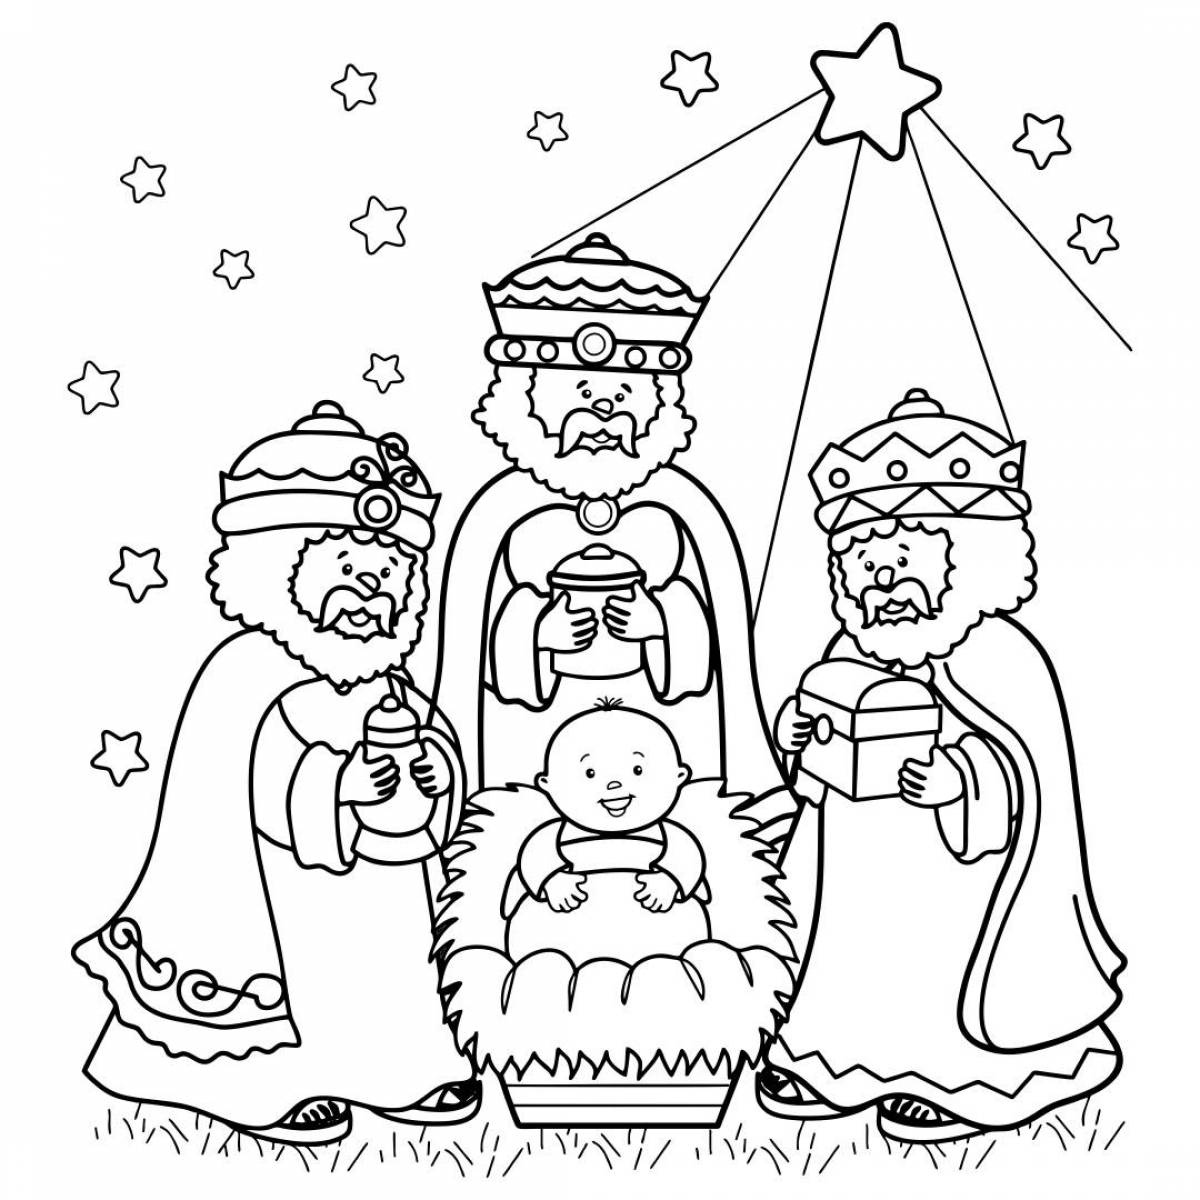 Glitter Christmas coloring book for 6-7 year olds